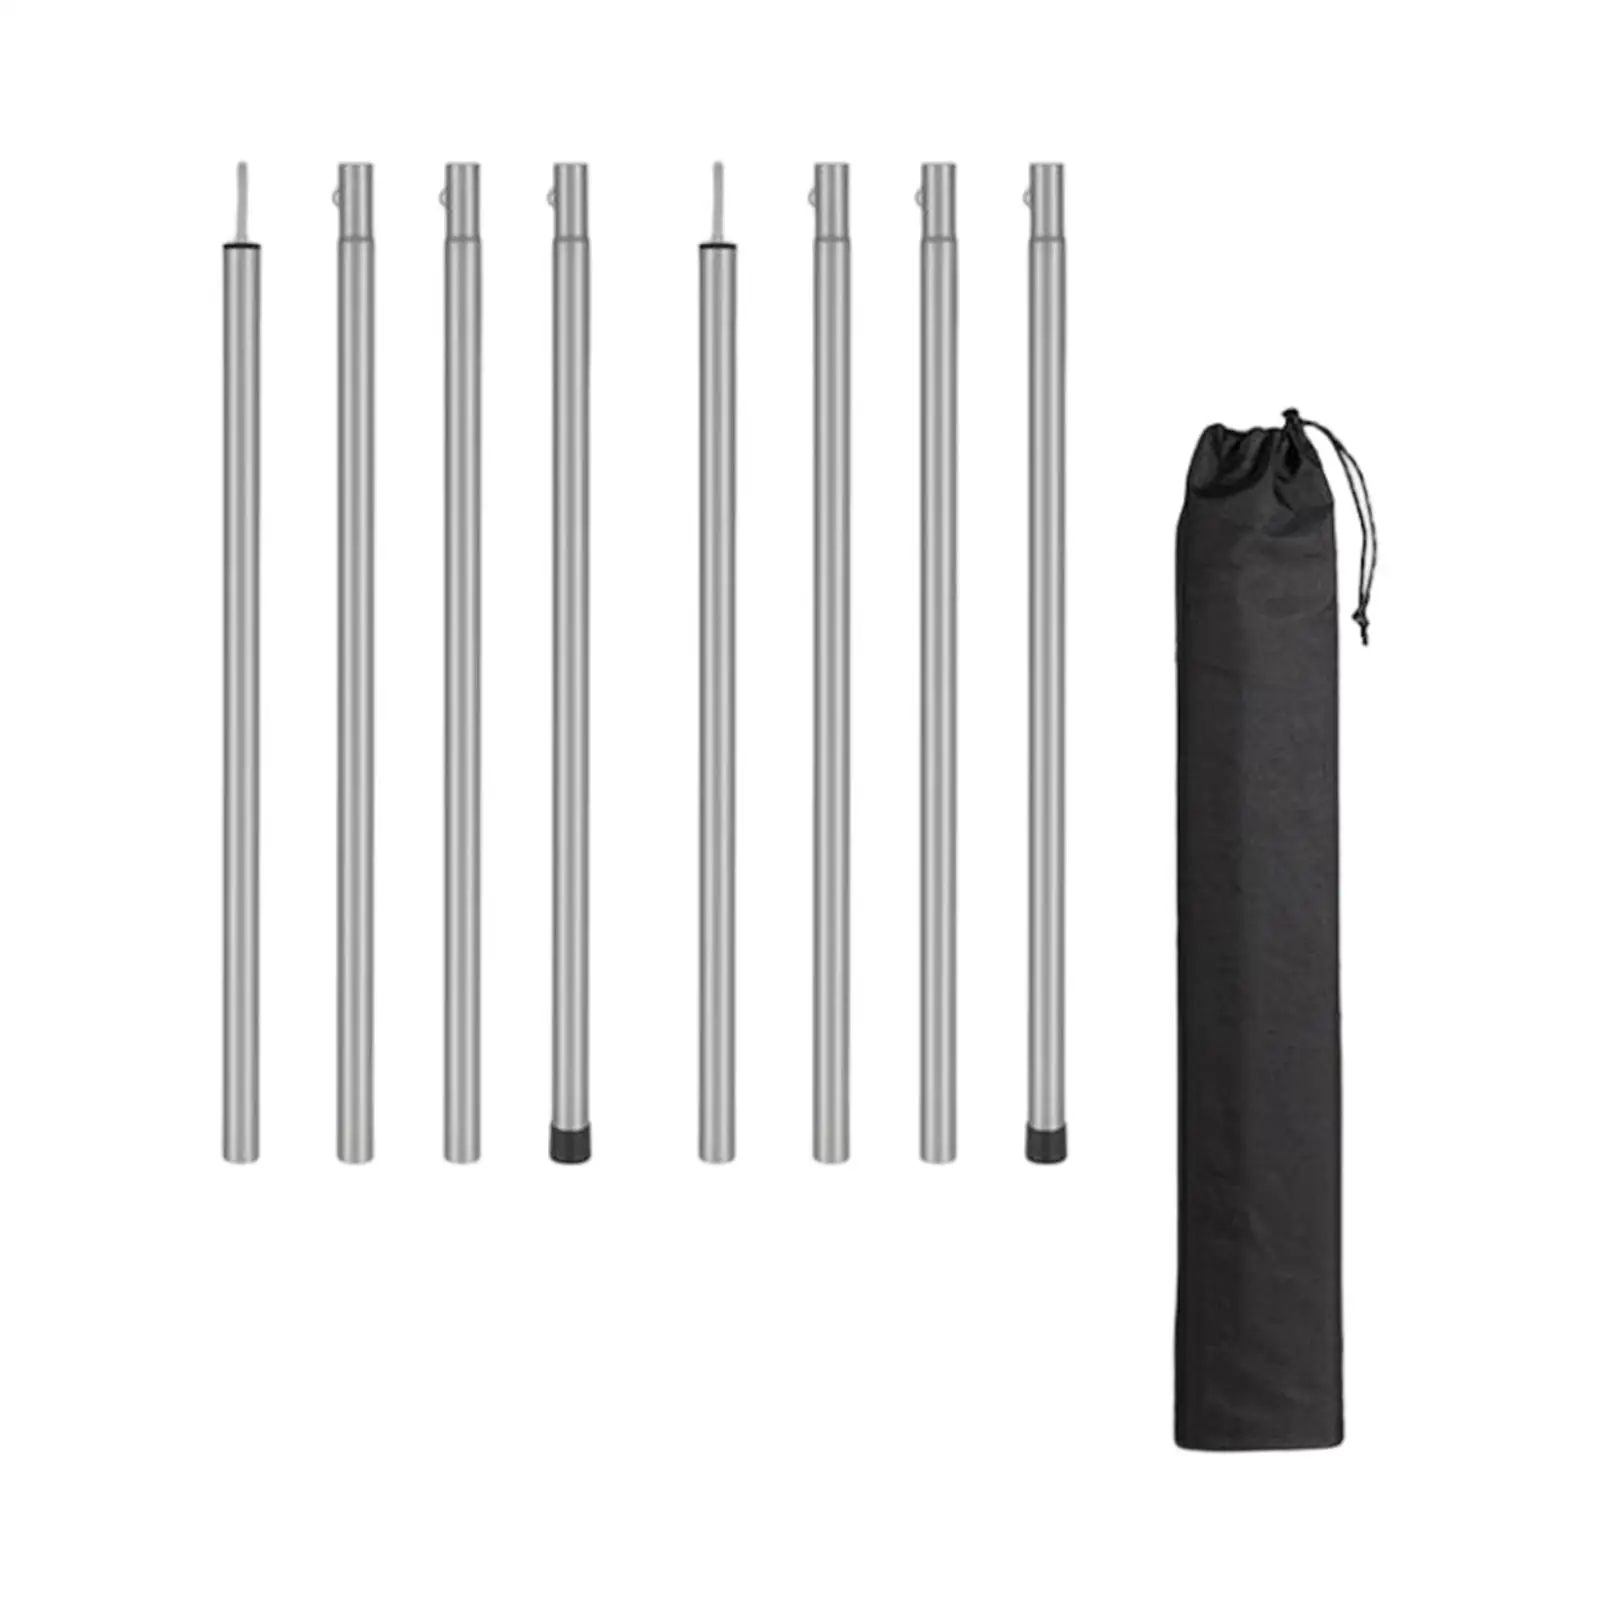 Multipurpose Tent Poles Canopy Pole Telescoping Removable Replacement Bar Folding Tent Tarp Poles for Camping Tent Tarp Travel